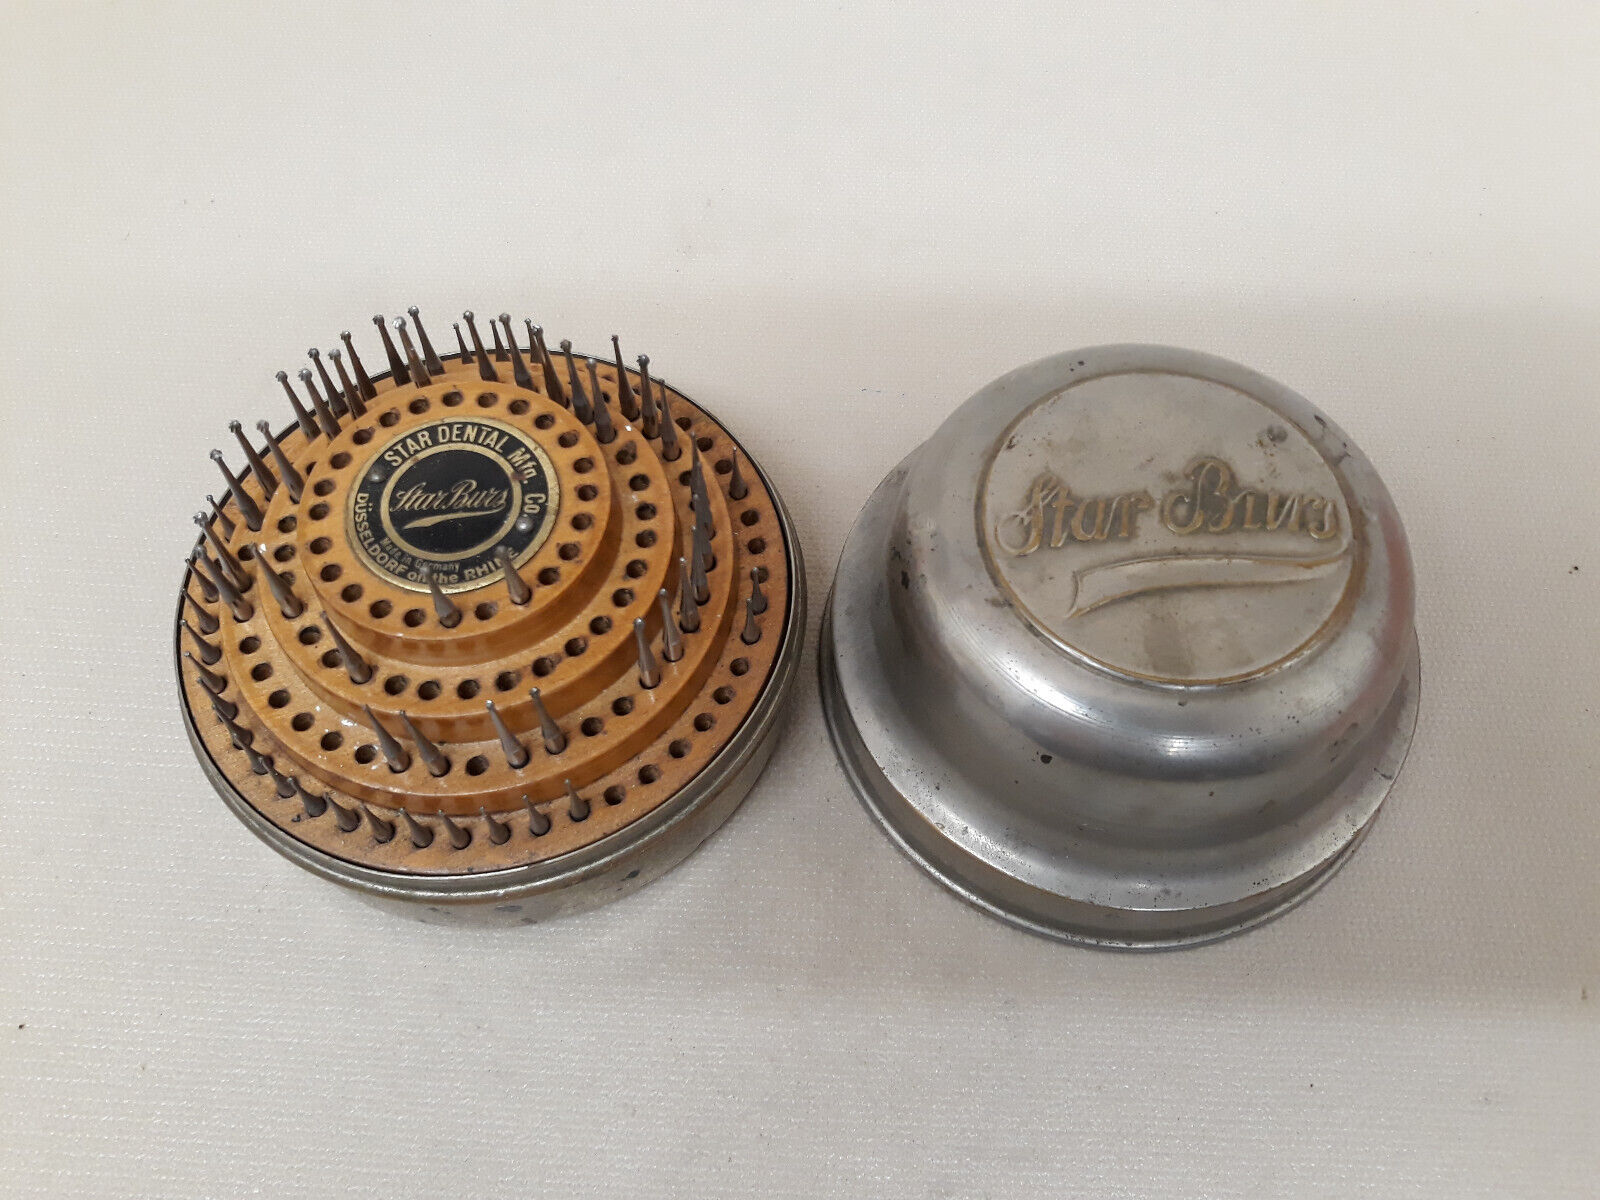 Star Dental Mfg Co Dental Burs With Metal Case Made in Germany